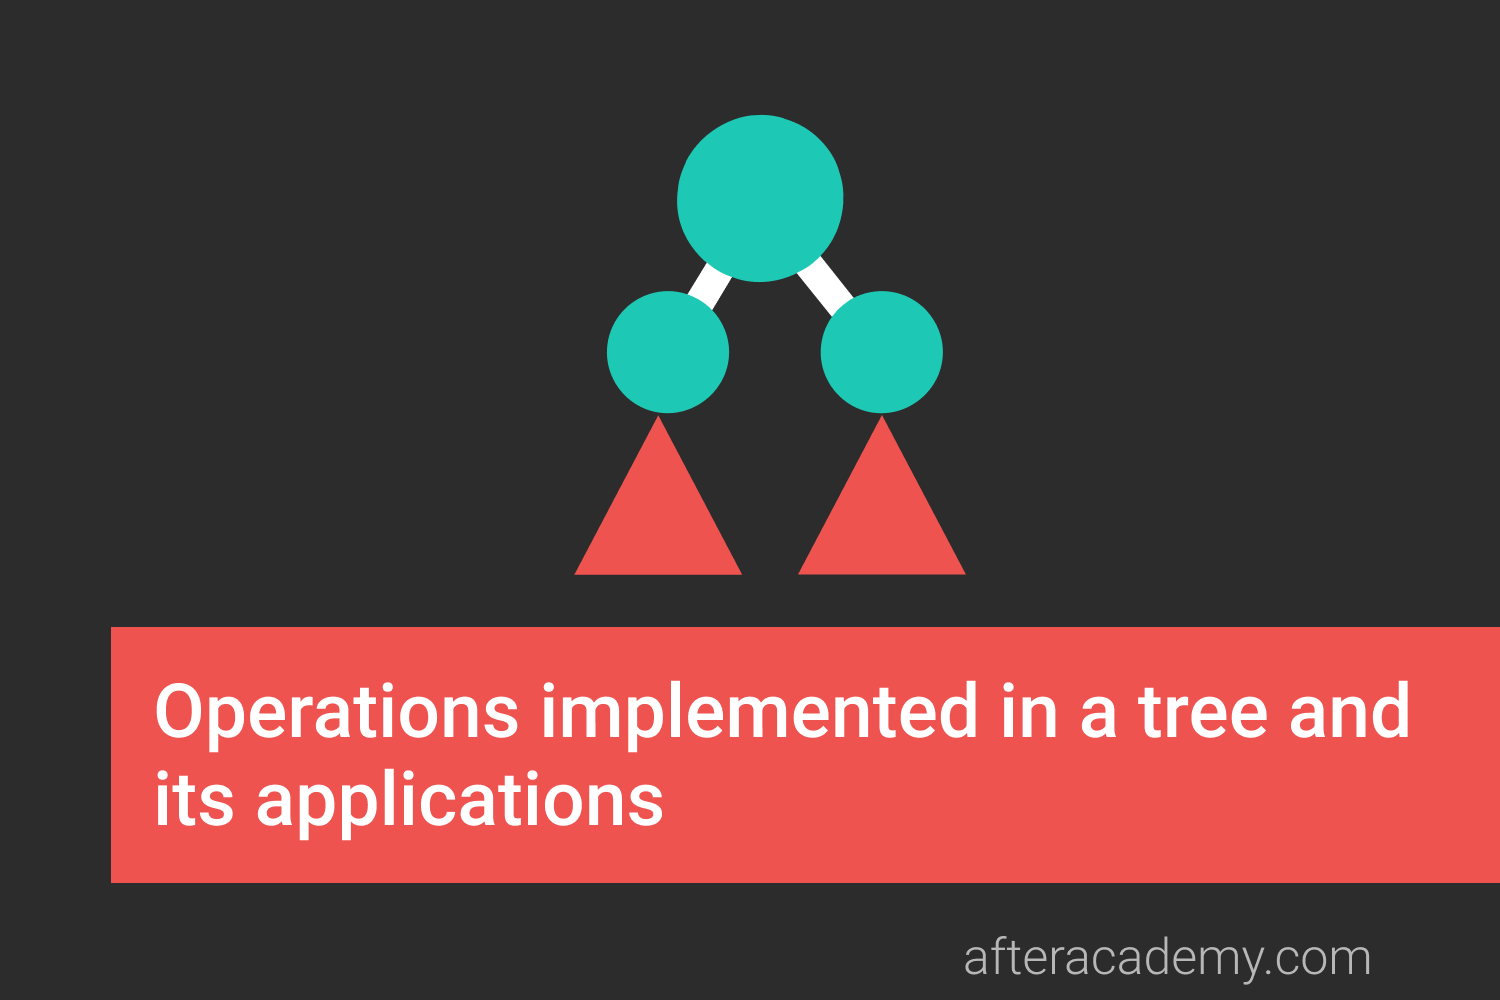 What are the operations implemented in tree and what are its applications?